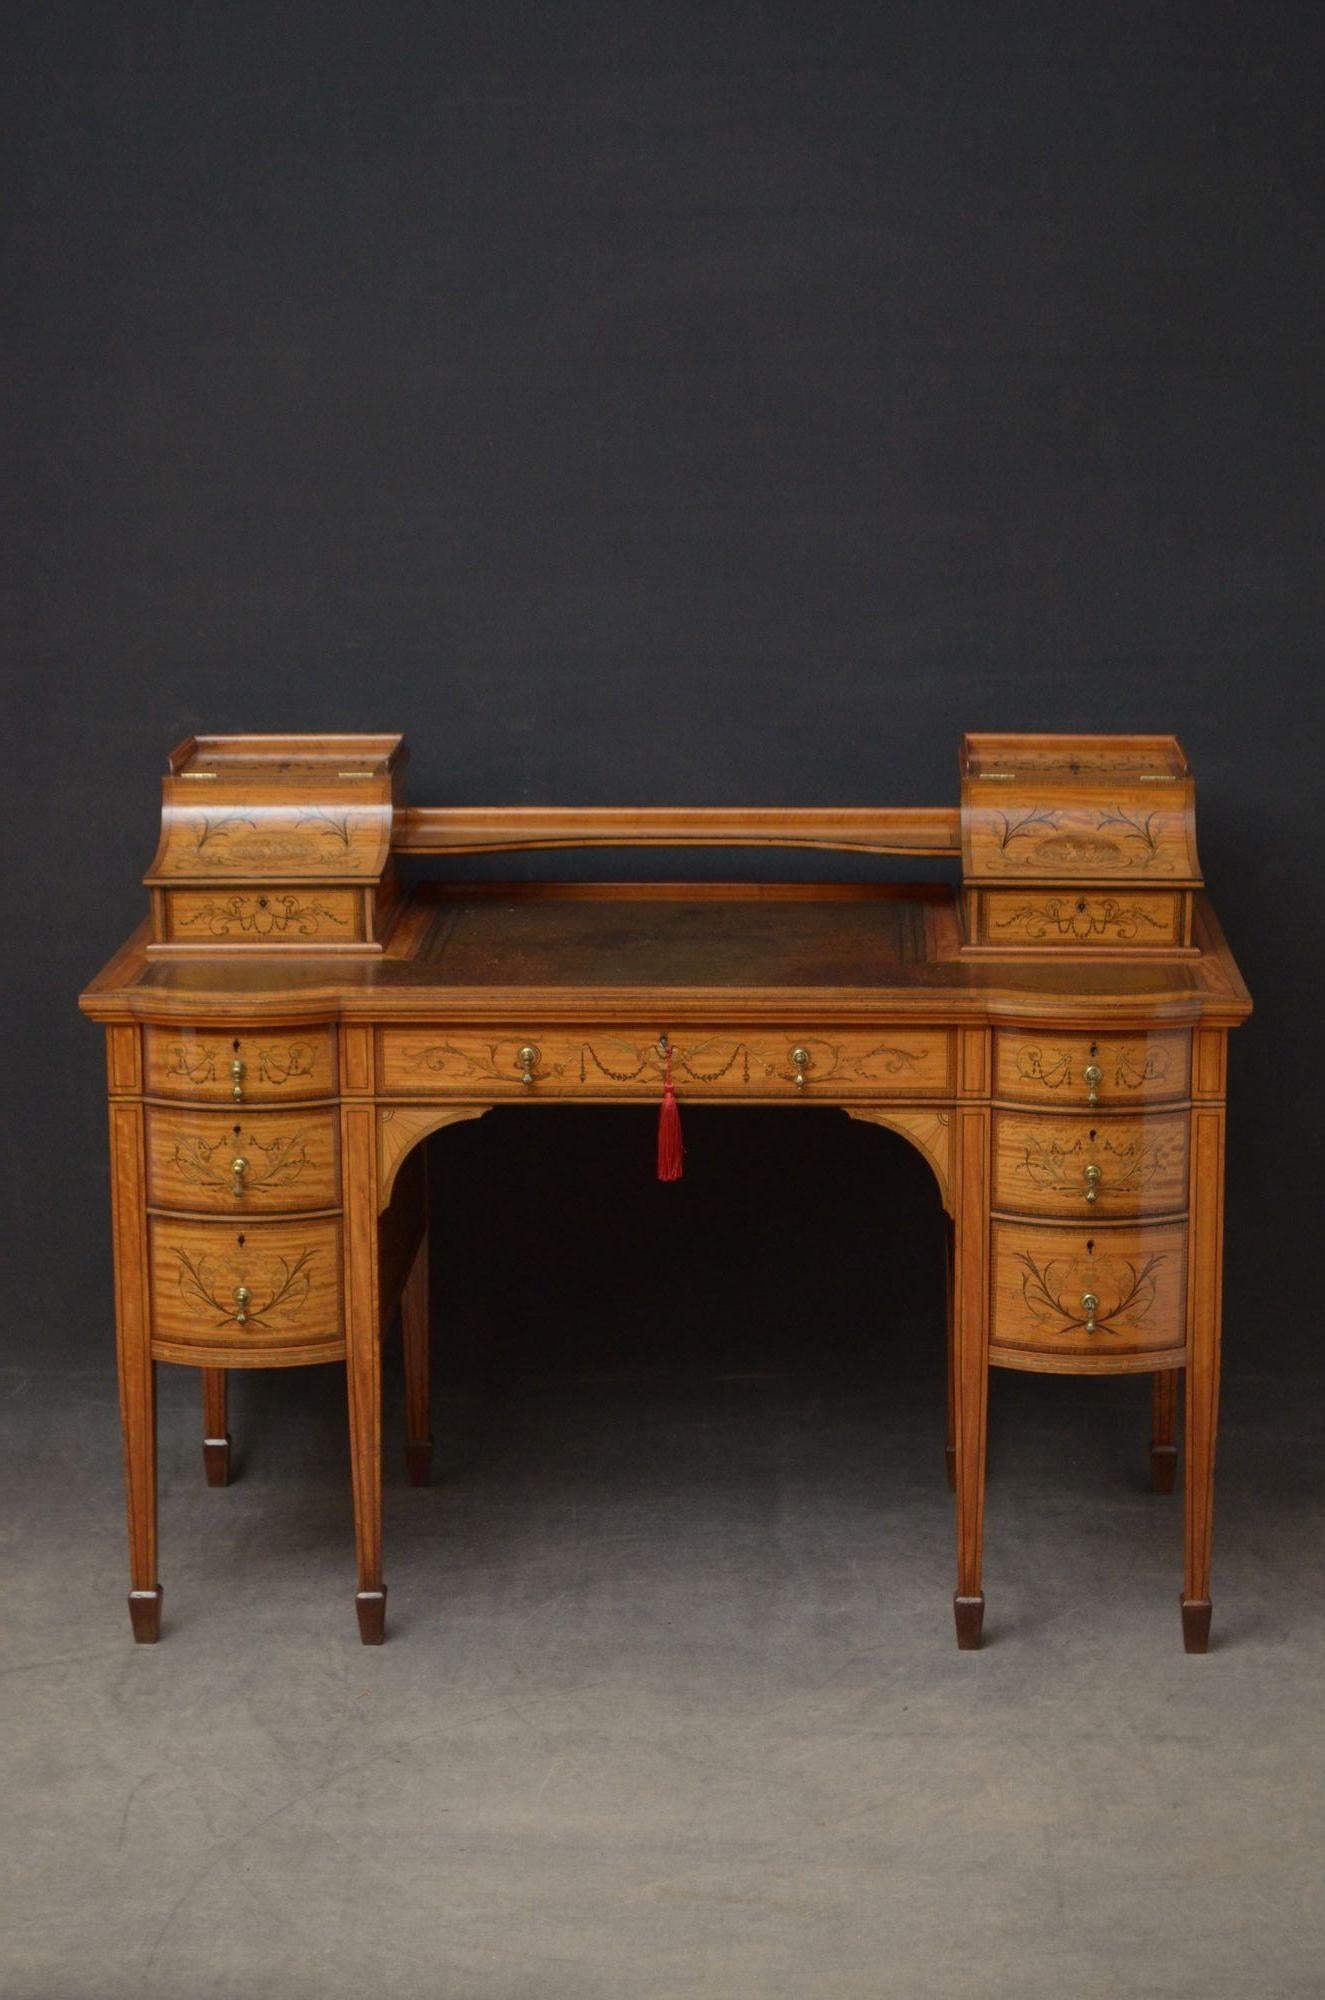 Sn5033 Exceptional quality Sheraton Revival satinwood and marquetry desk attributed to Edwards and Roberts, having original tooled leather writing surface flanked by two floral inlaid boxes, enclosing drawers with pen tray and letter compartments